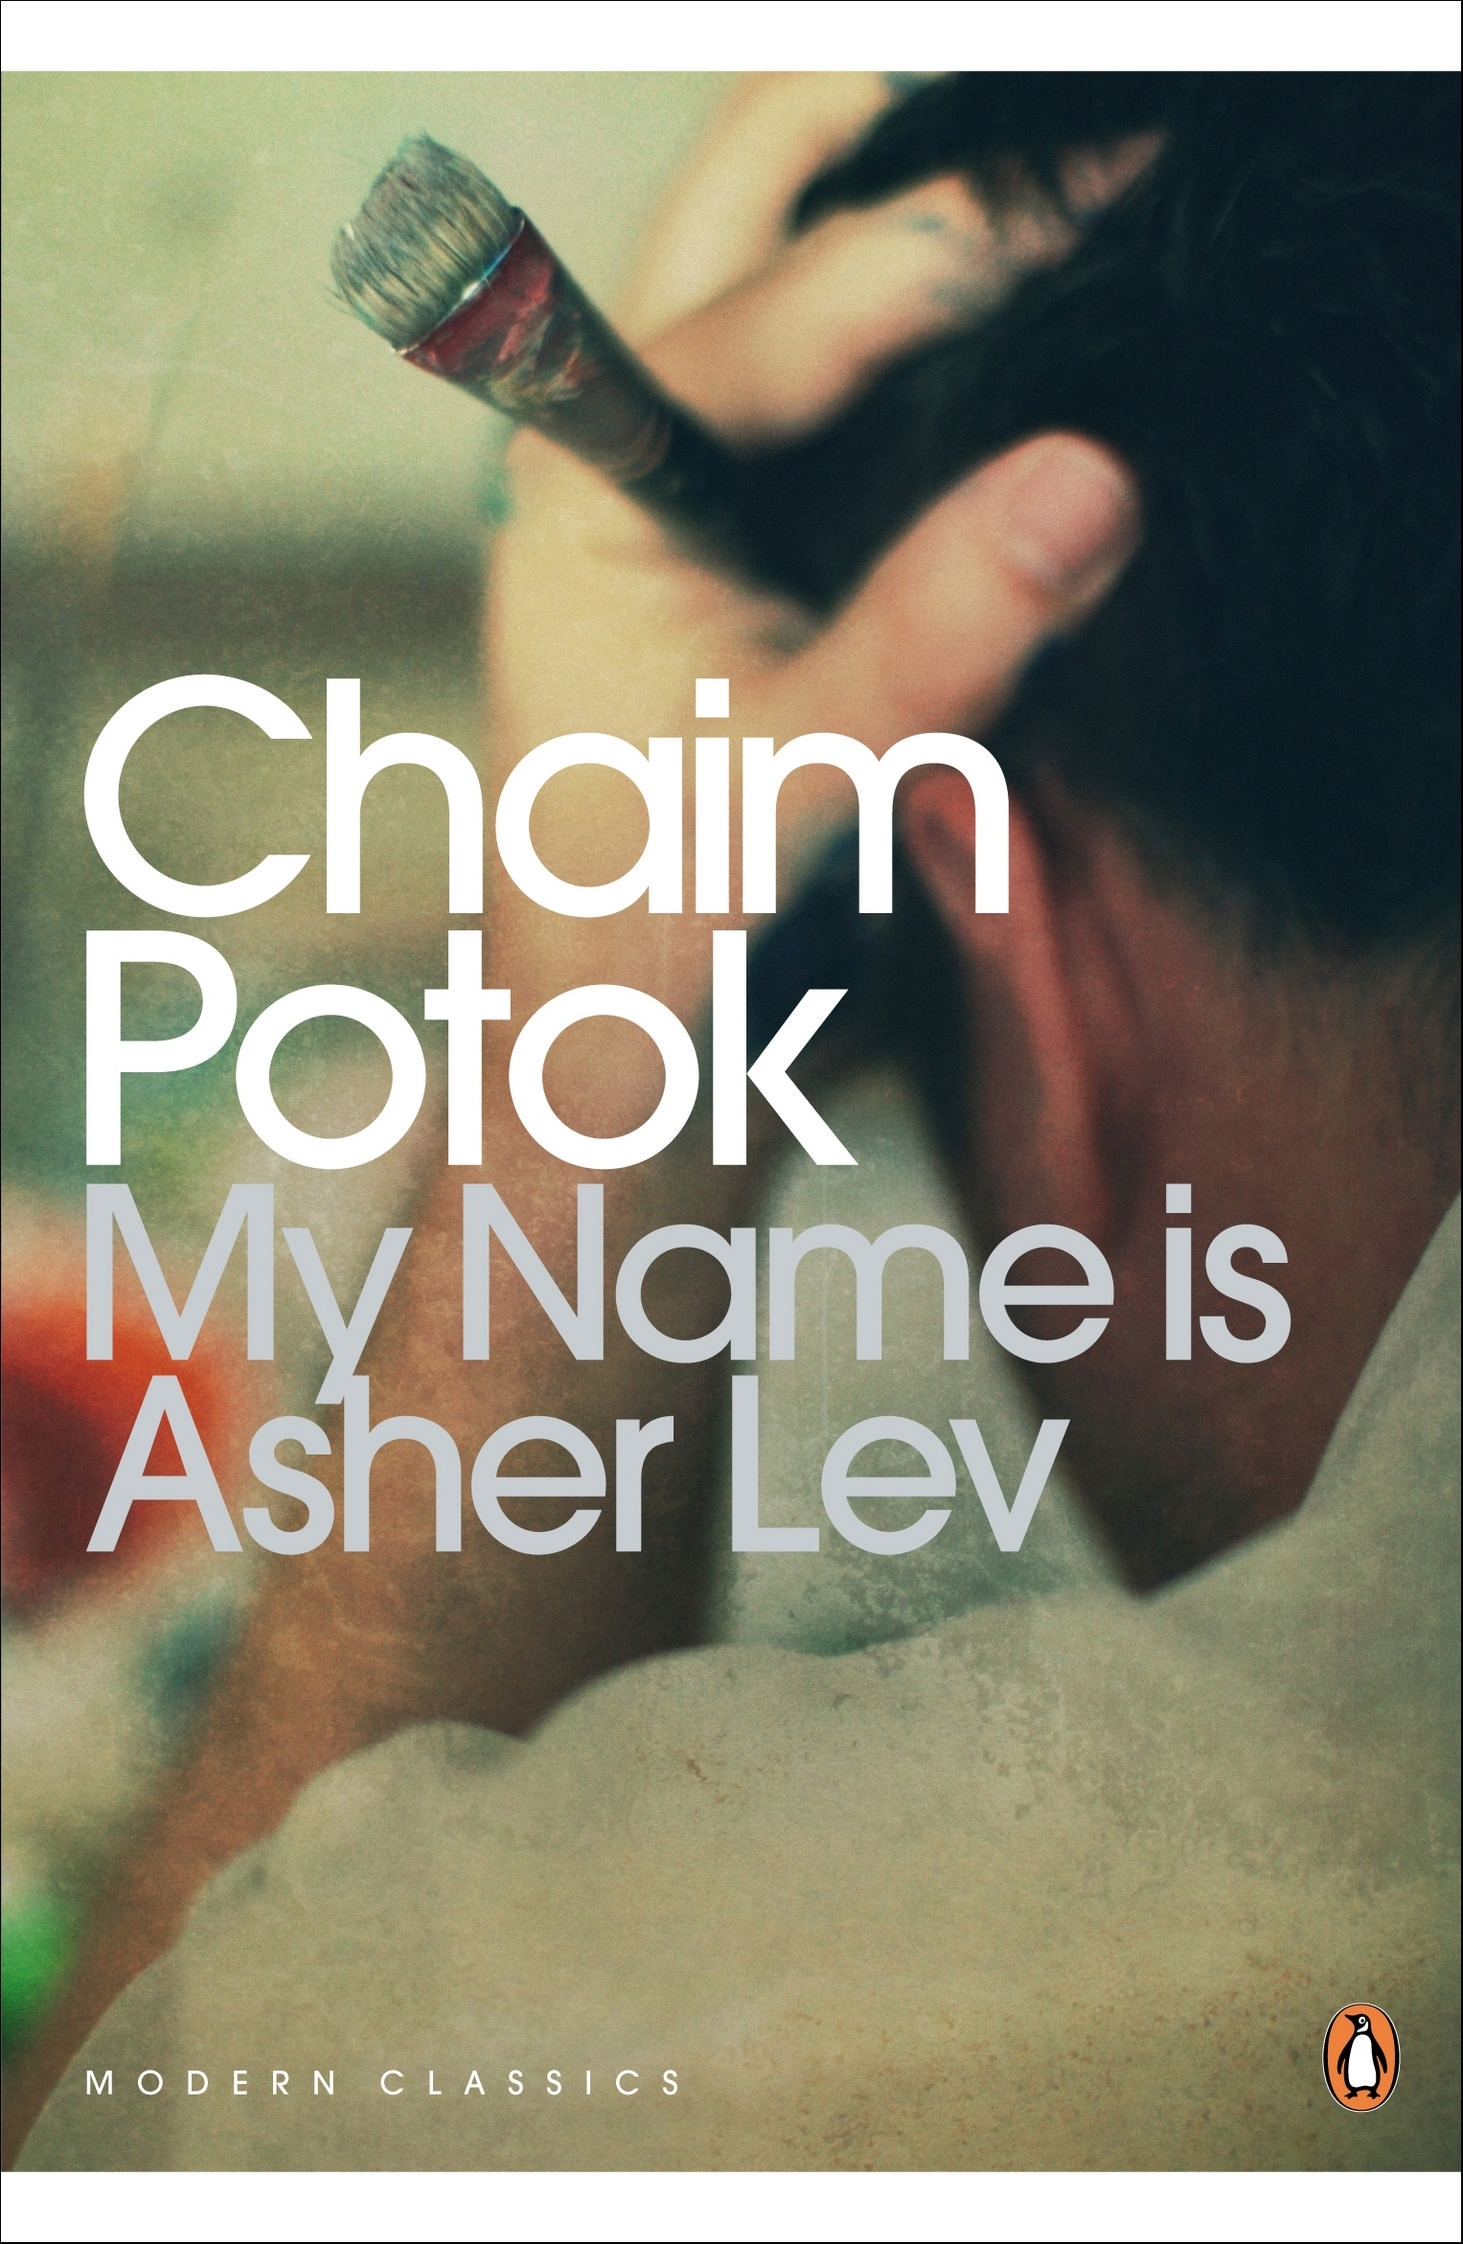 book review my name is asher lev